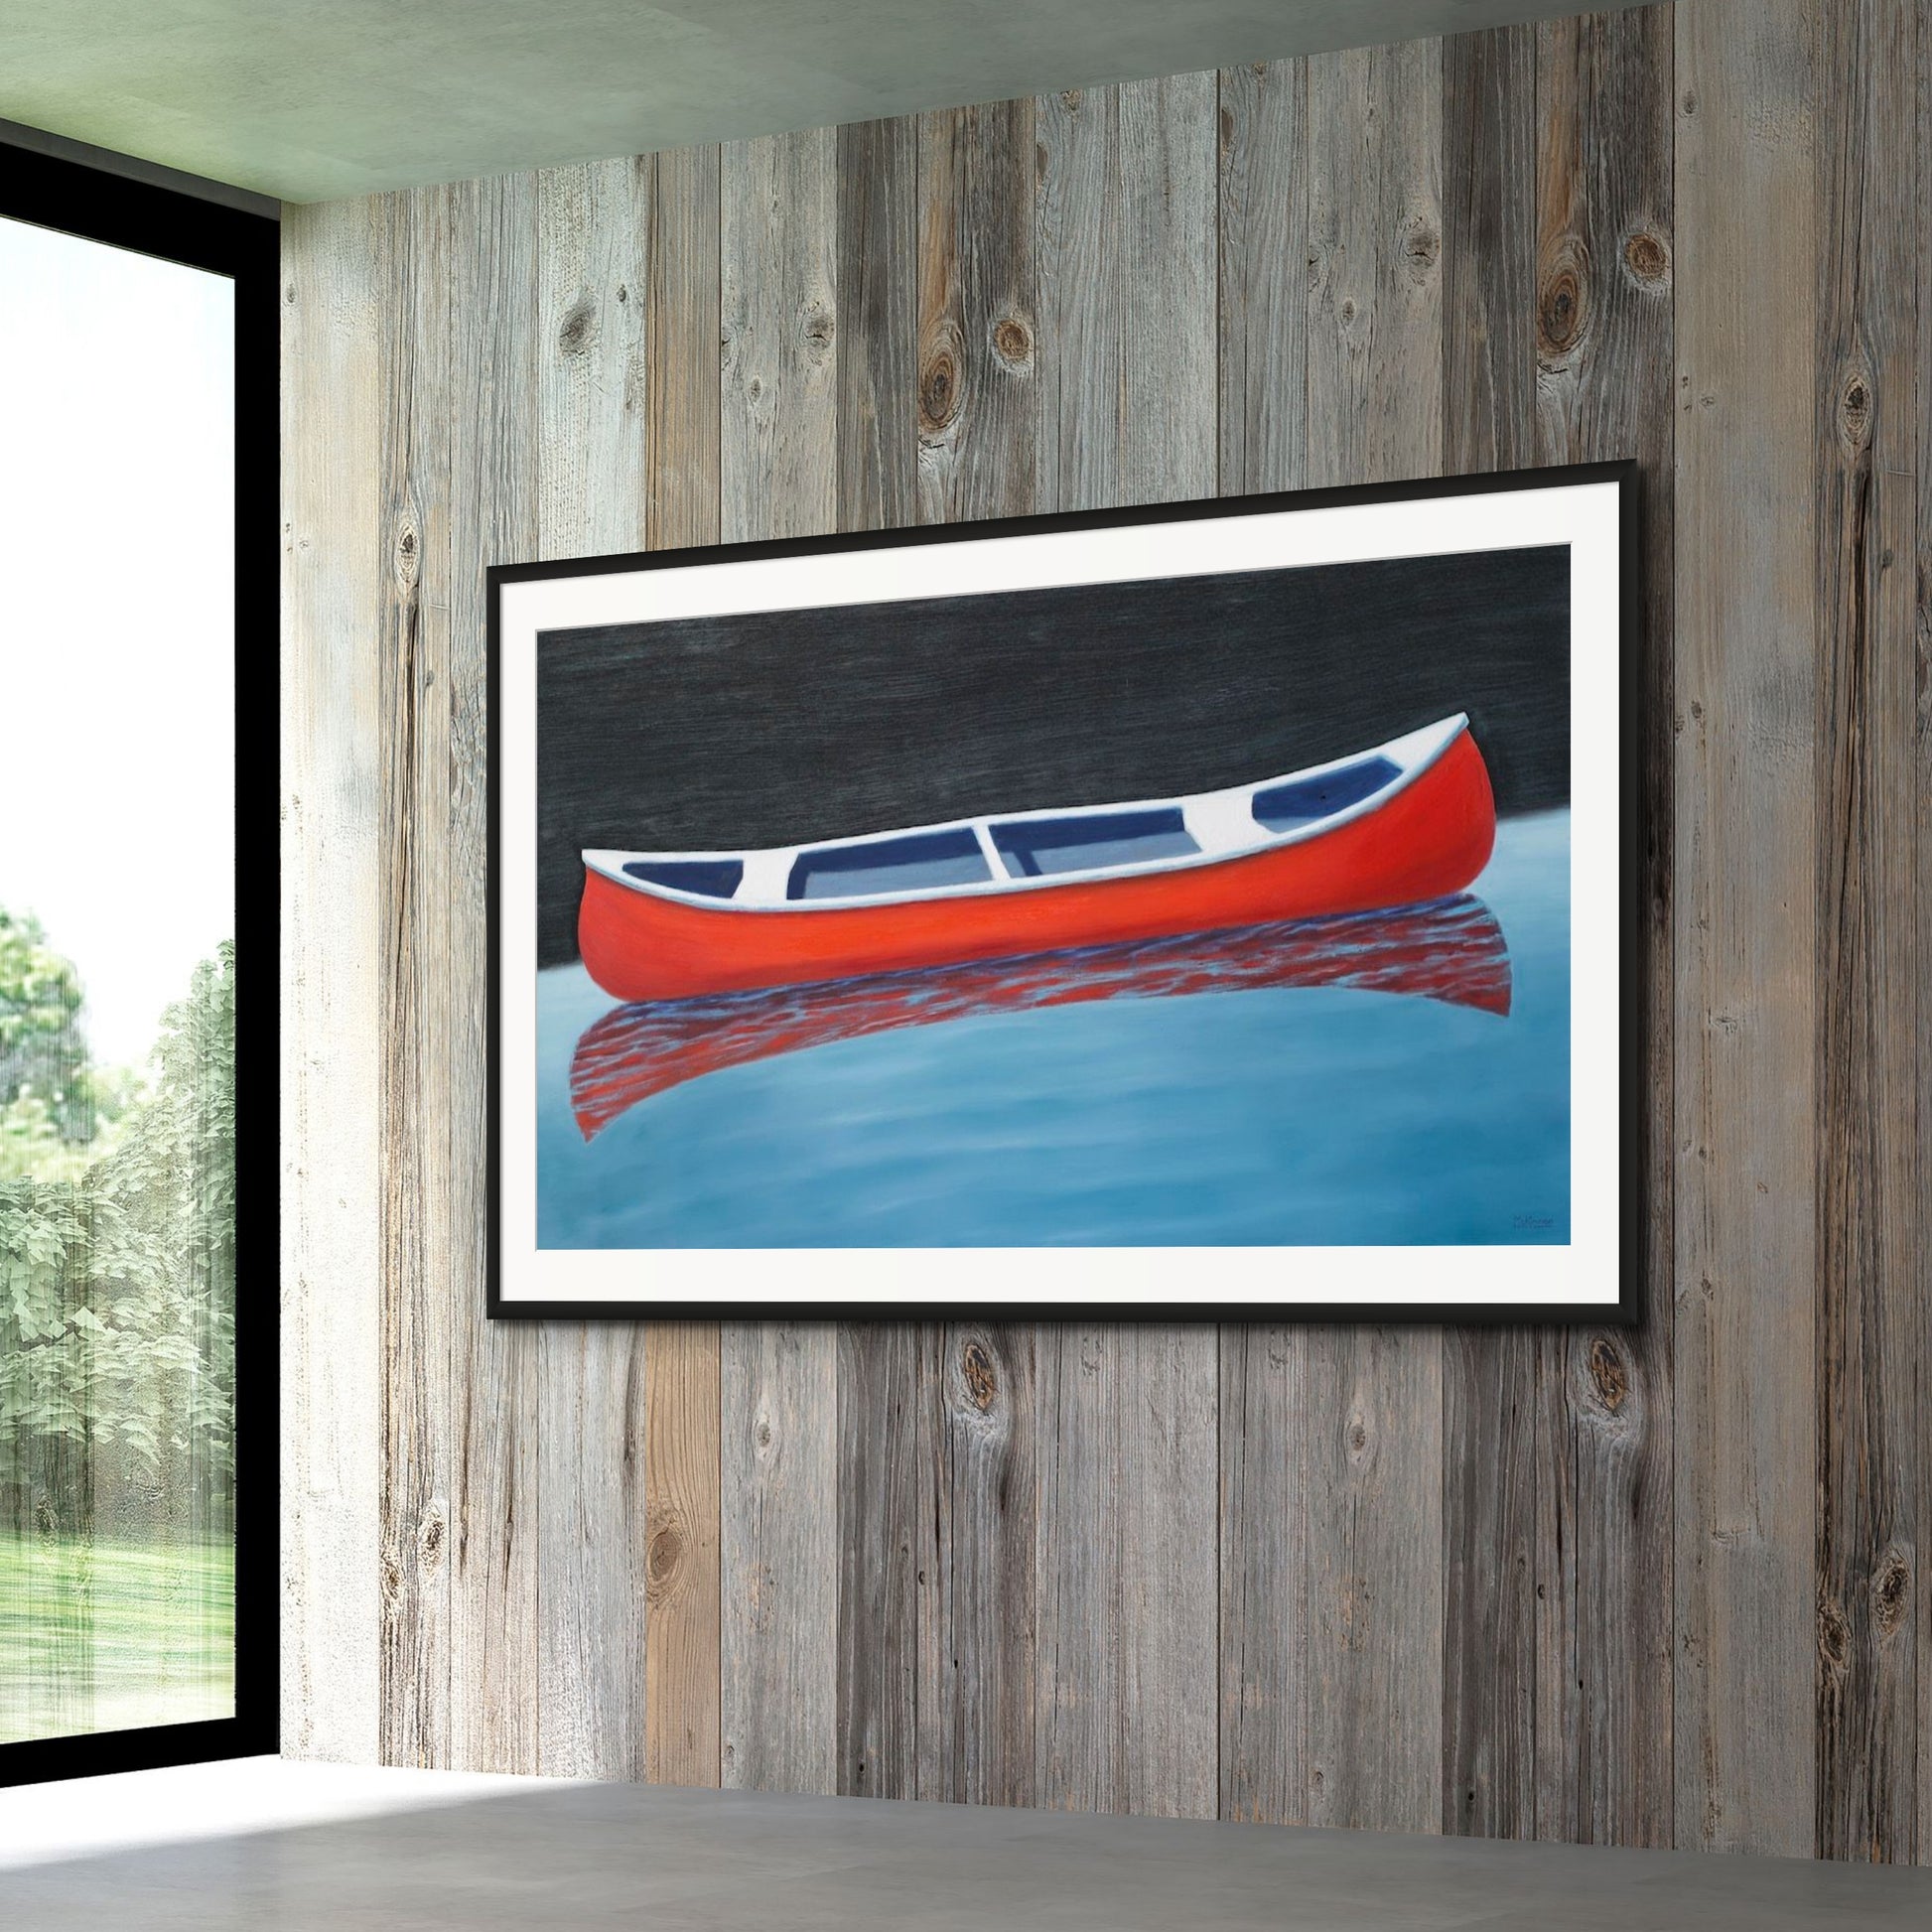 Canoe painting of a small red boat by Canadian artist Catherine McKinnon. The red canoe is floating on almost still blue water in the foreground and the background is pitch black. The giclee print is framed in black with white matting. It is mounted on a gray wooden wall.